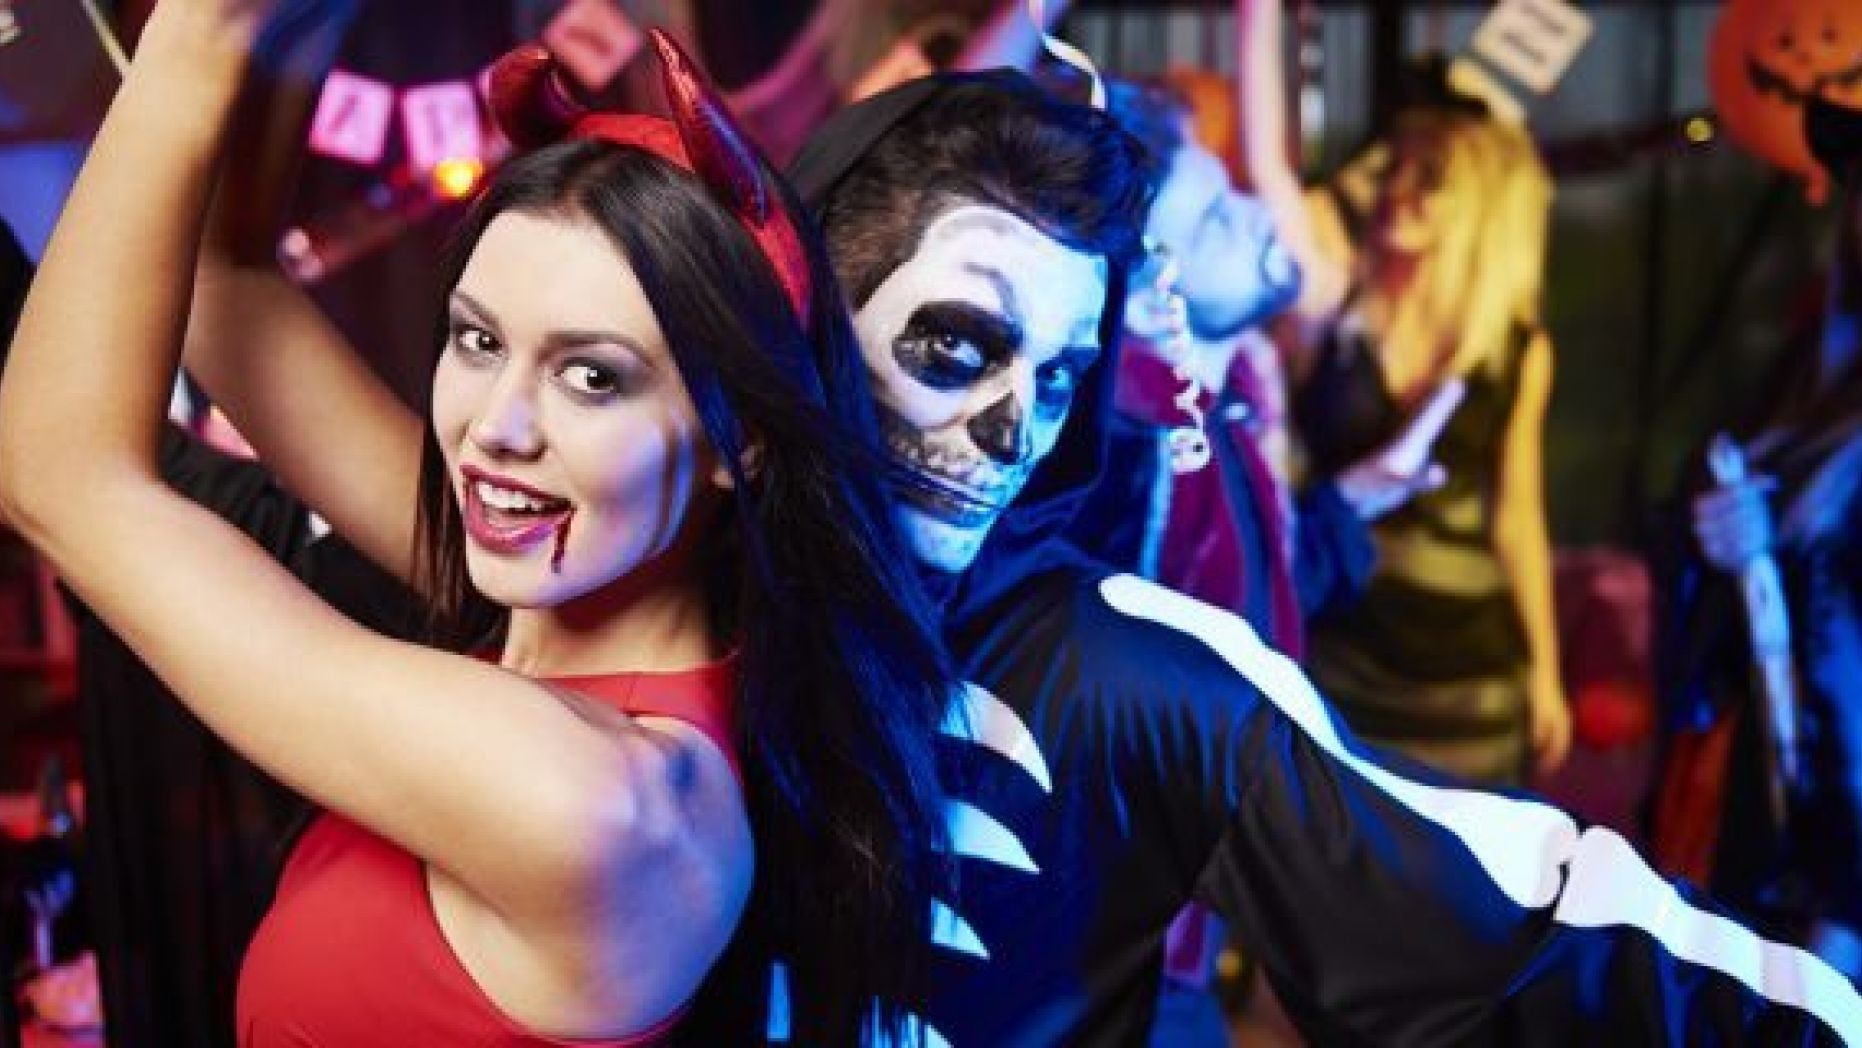 Halloween Party Costume Ideas
 5 Halloween costume ideas for couples